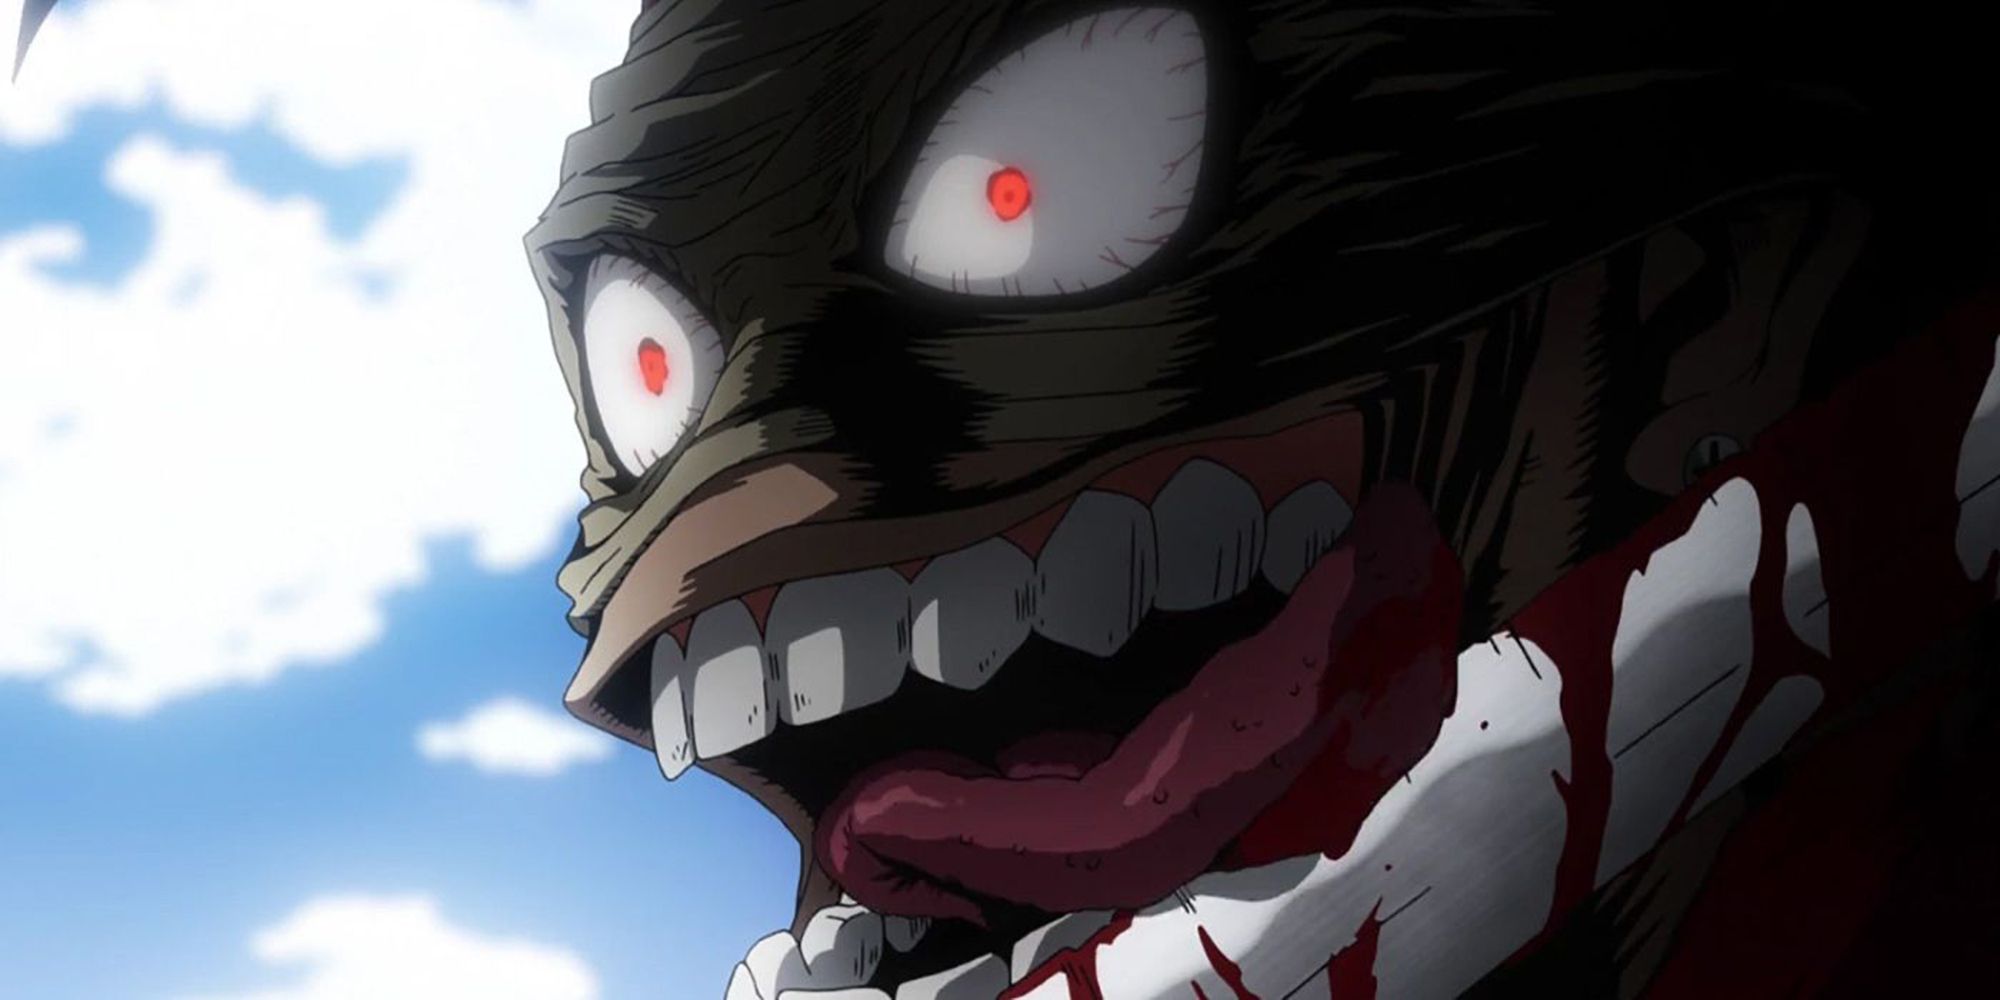 My-Hero-Academia-Stain-Licking-Blood-Off-His-Knife-To-Activate-His-Bloodcurdle-Quirk